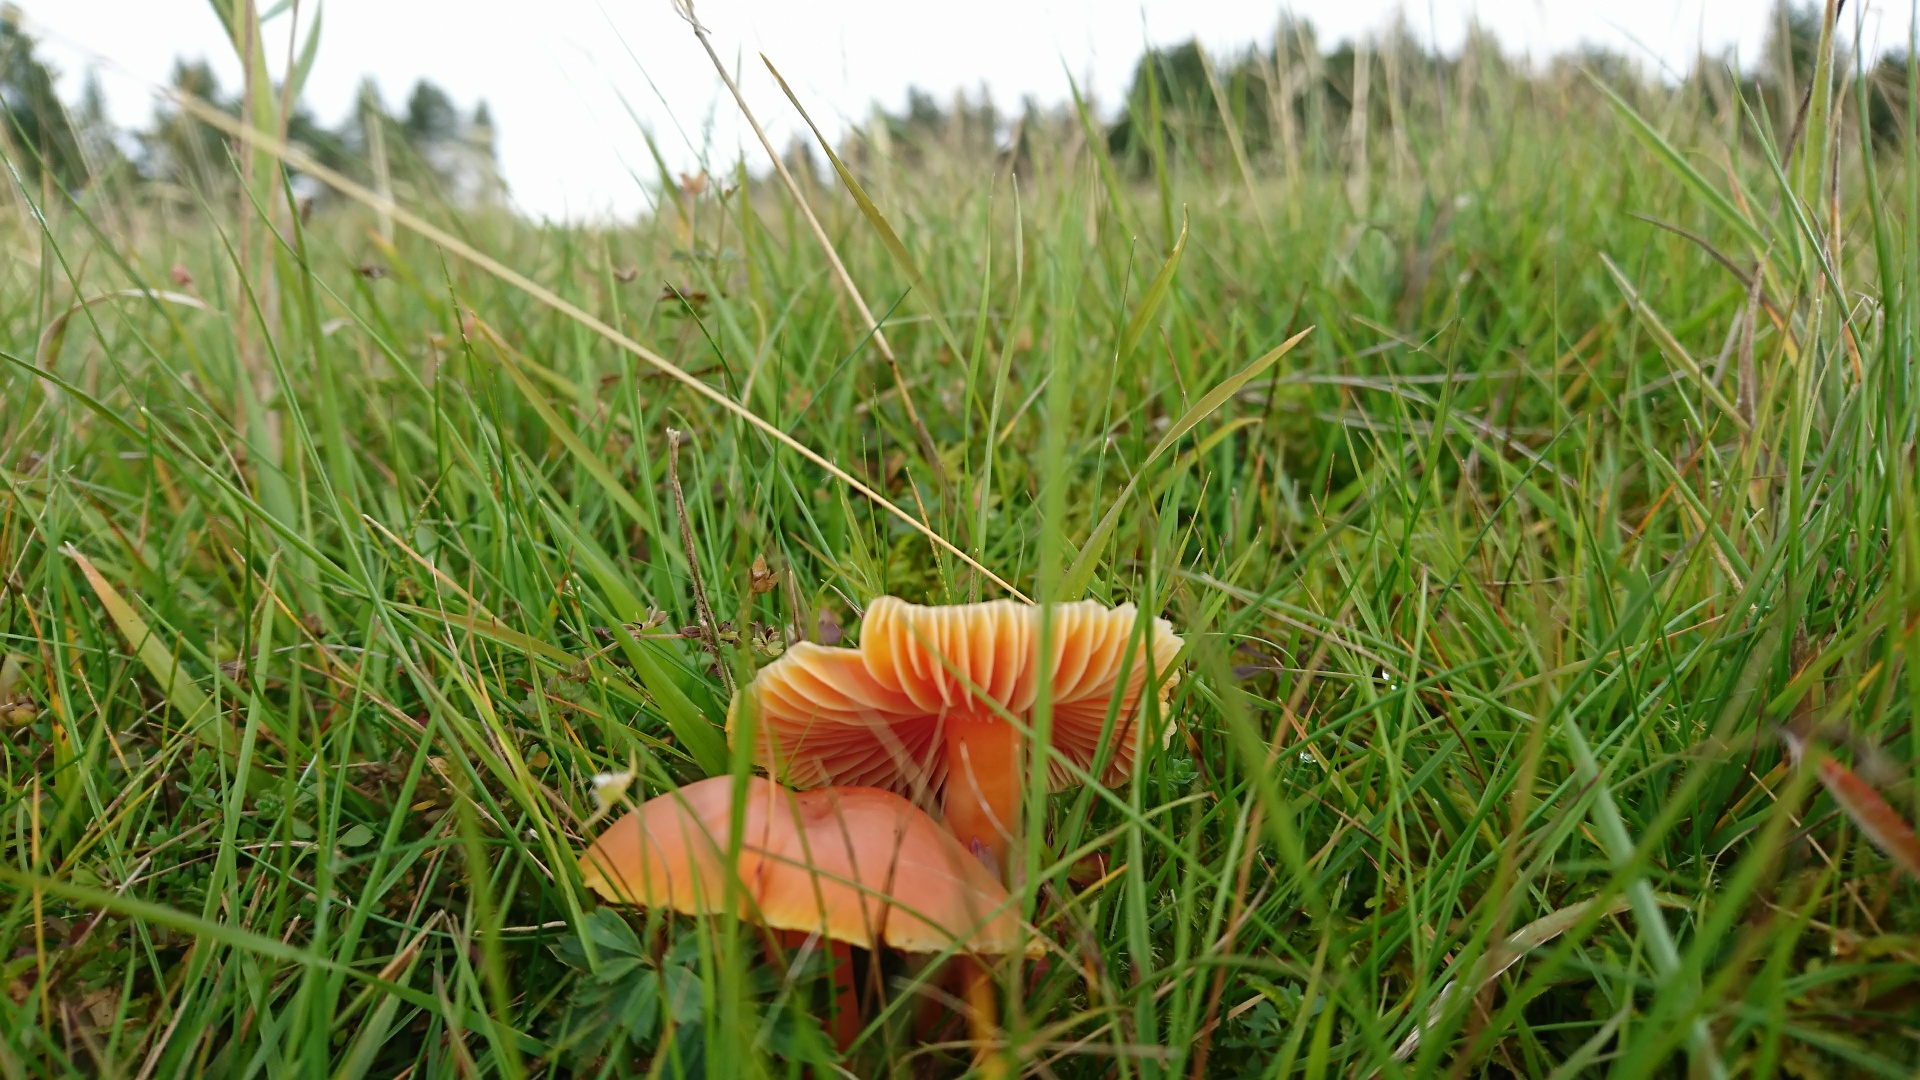 Conservationists will work with landowners to help grassland that supports waxcap fungi